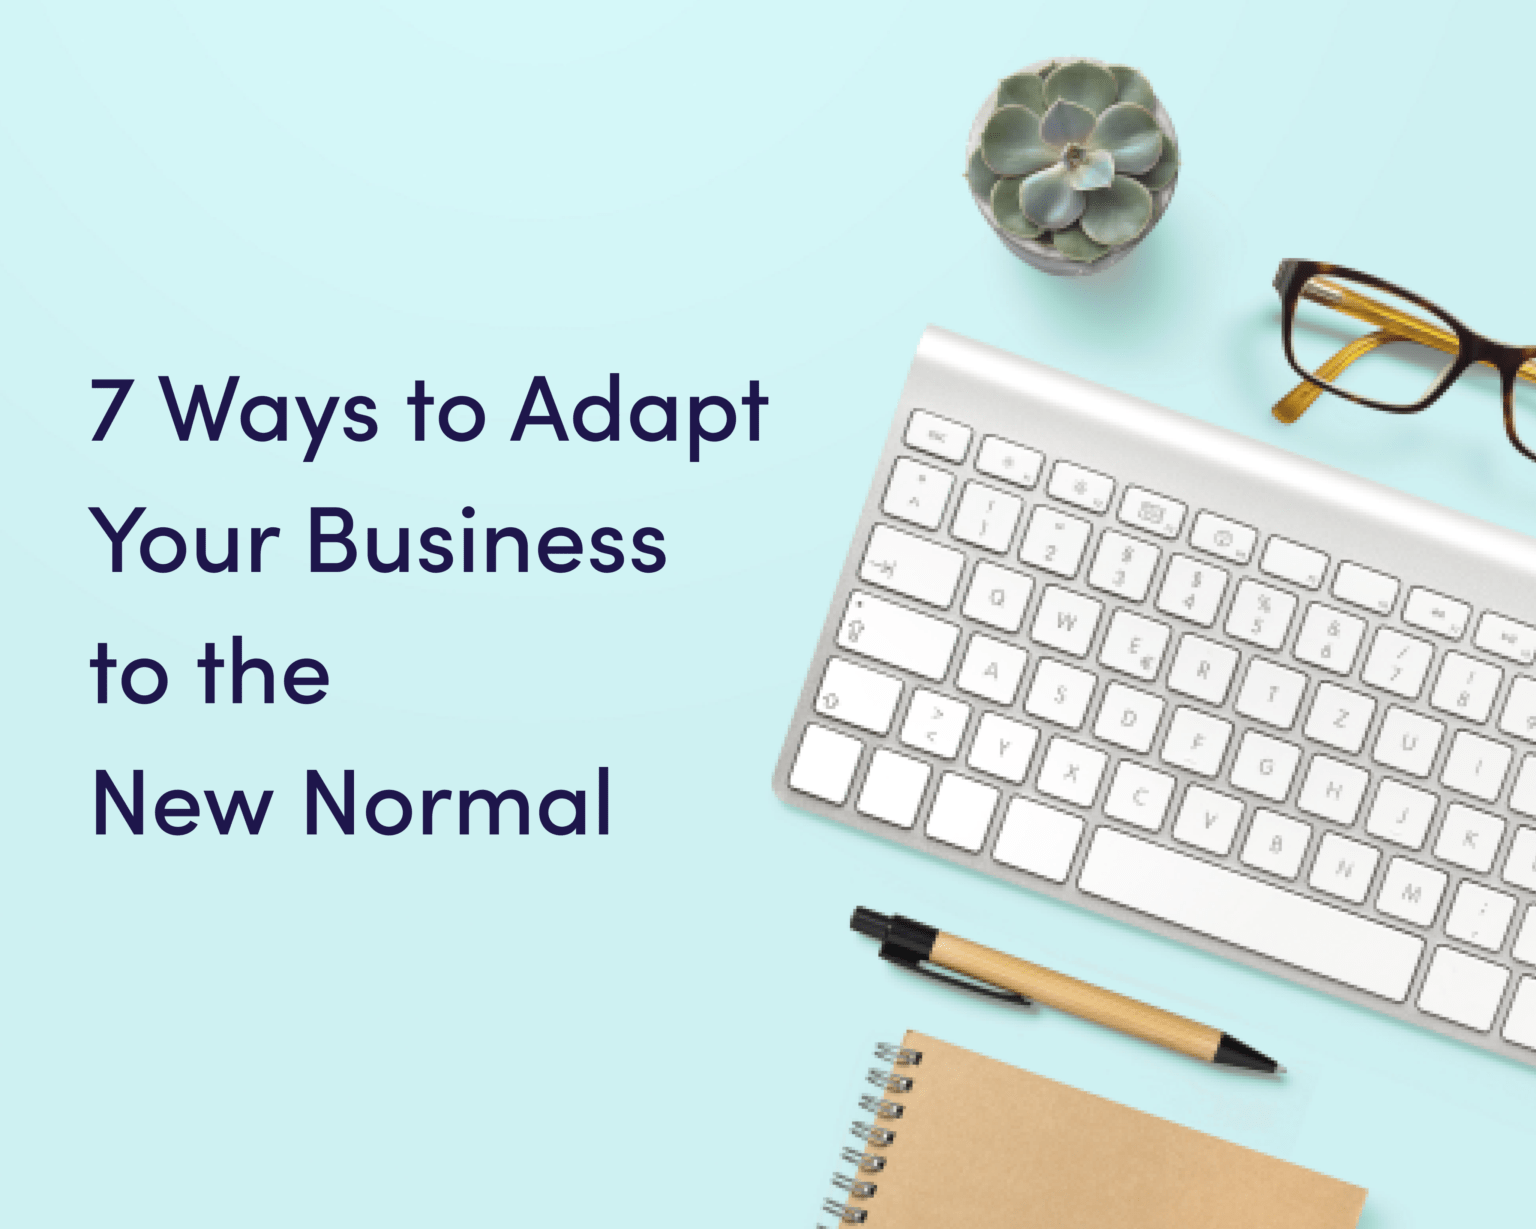 7 Ways to Adapt Your Business to the New Normal